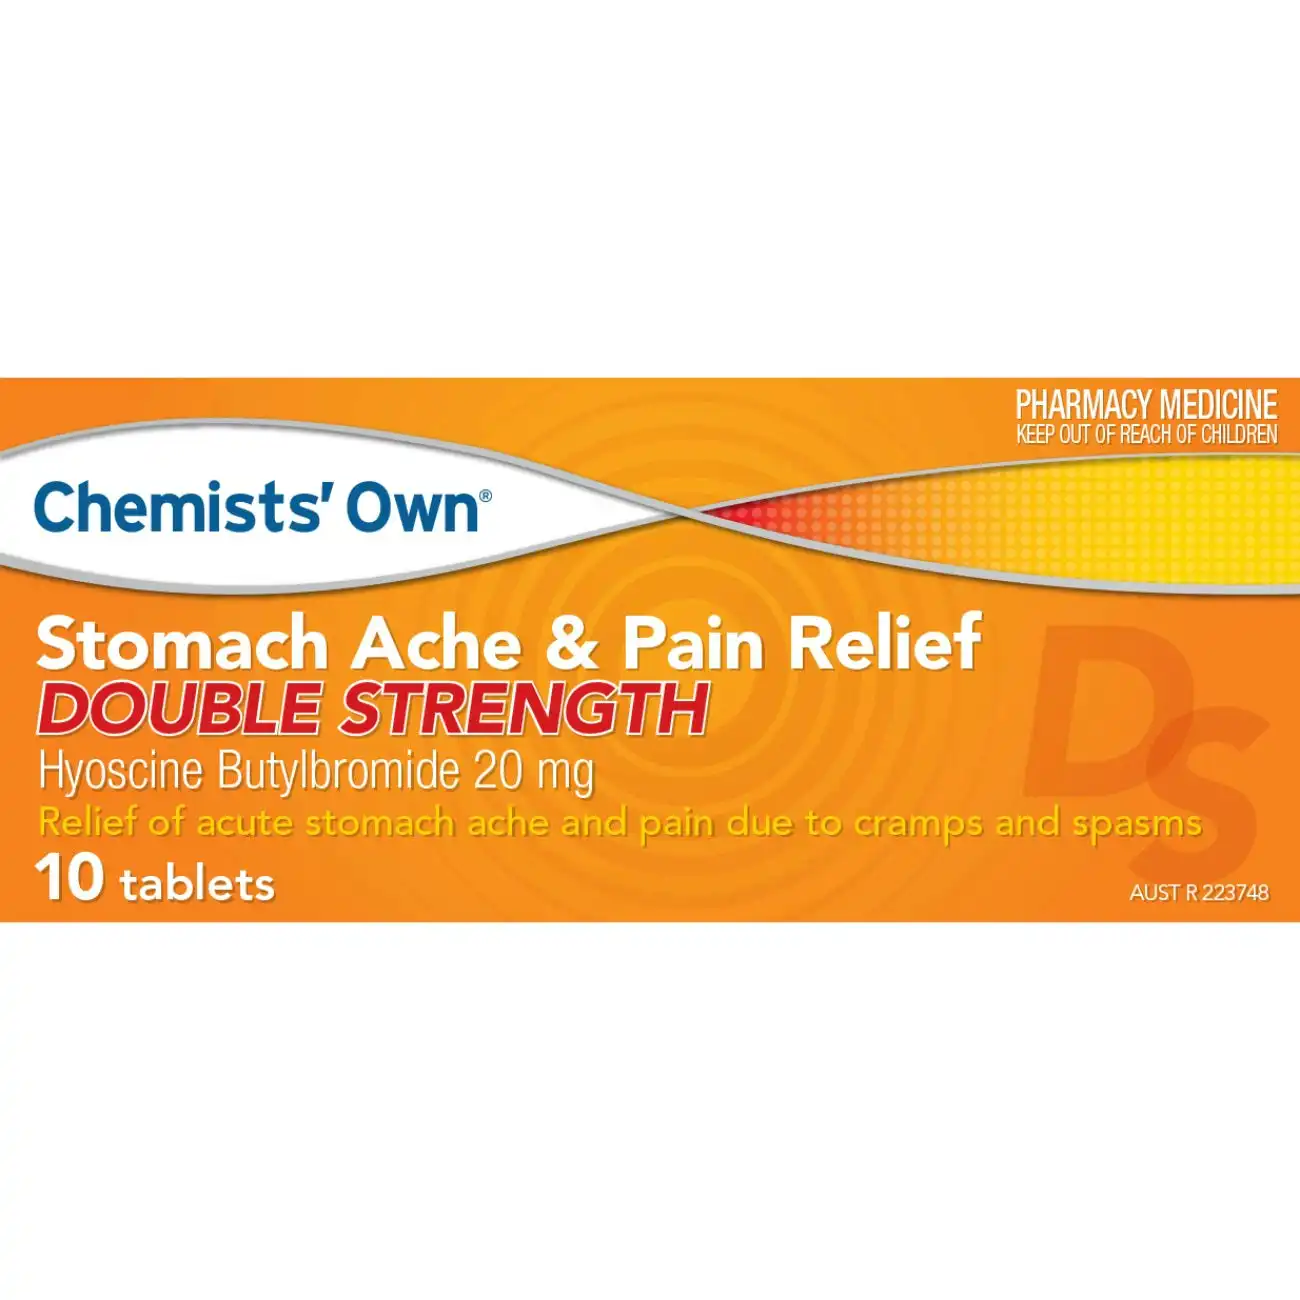 Chemists' Own Stomach Ache & Pain Relief 20 mg Double Strength 10 Tabs (Generic of BUSCOPAN FORTE)